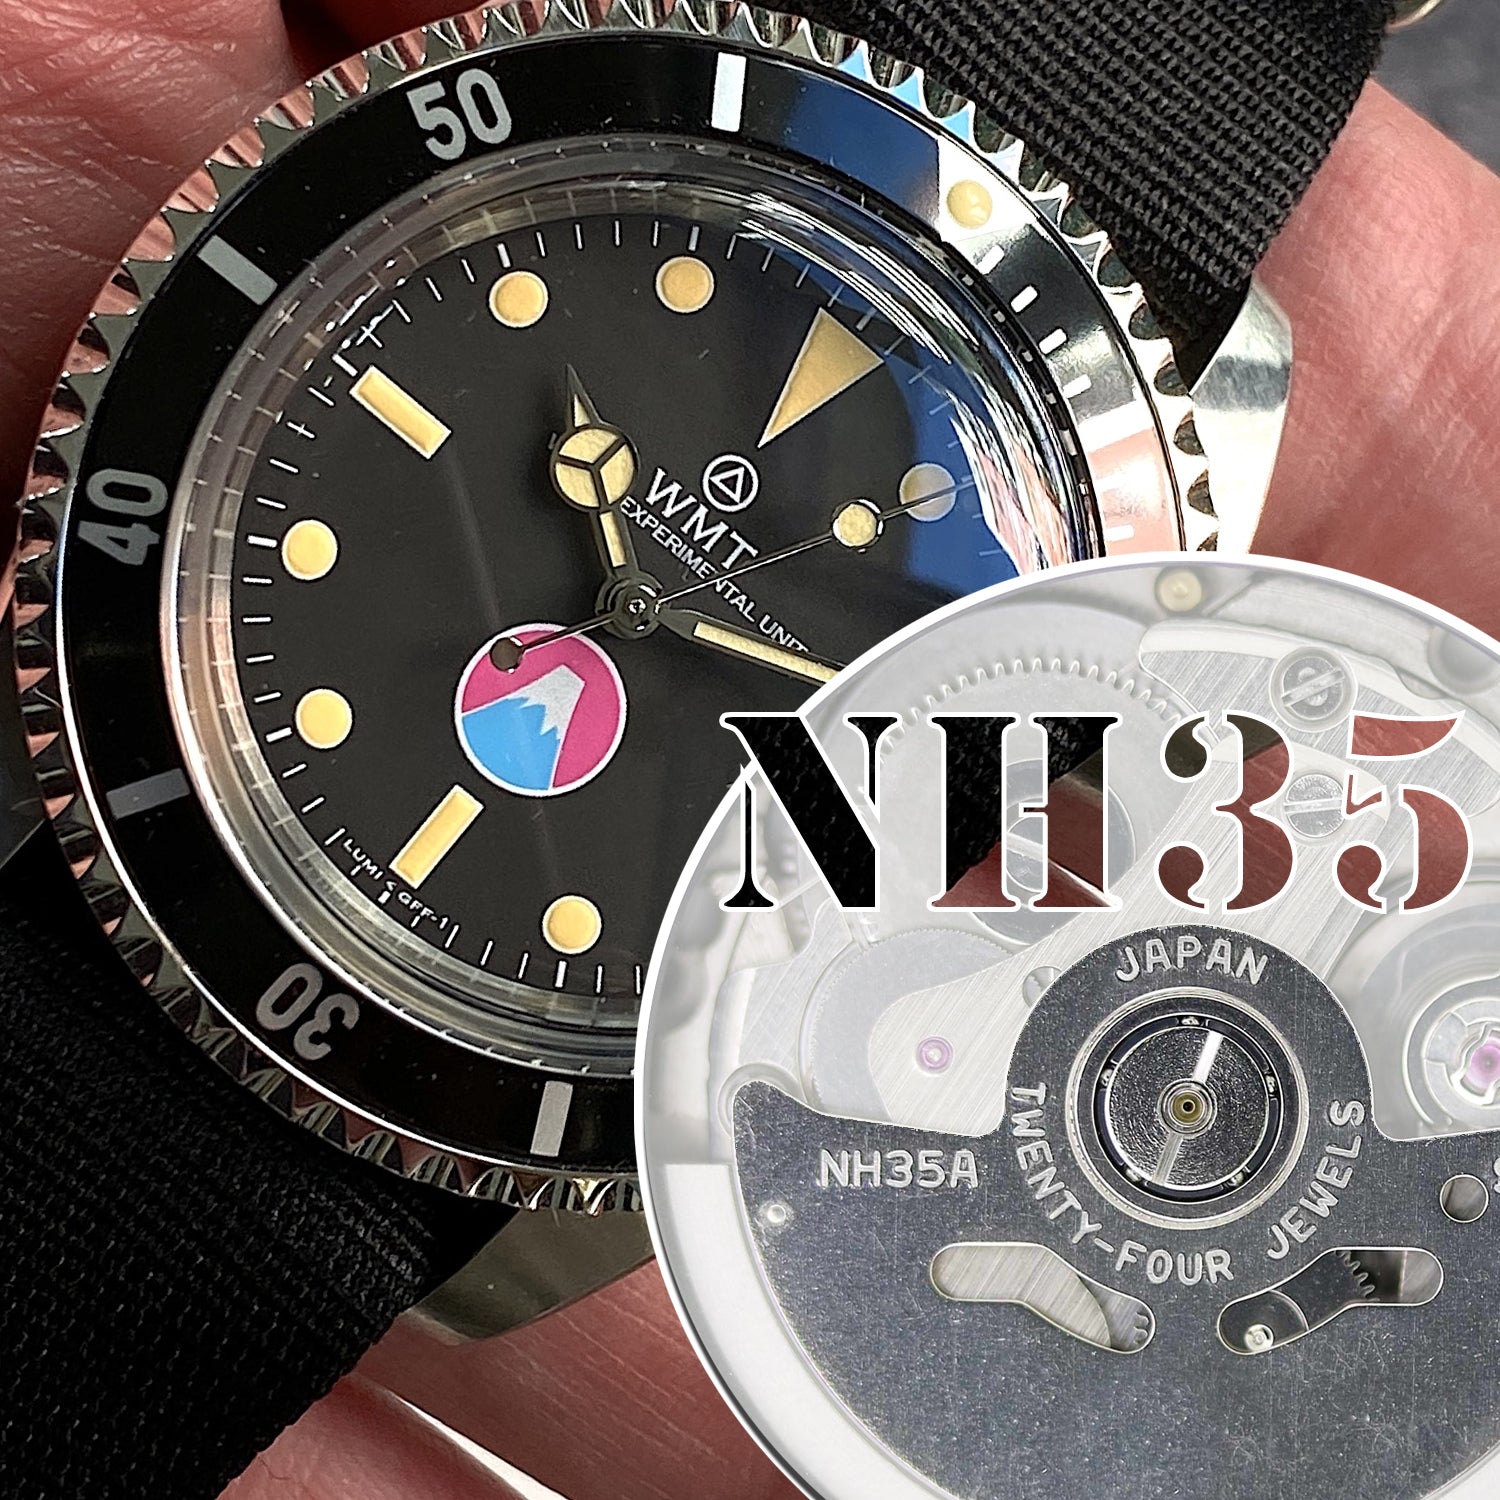 Seiko NH35 Movement, the Reliable Precise Timekeeping | Strapcode